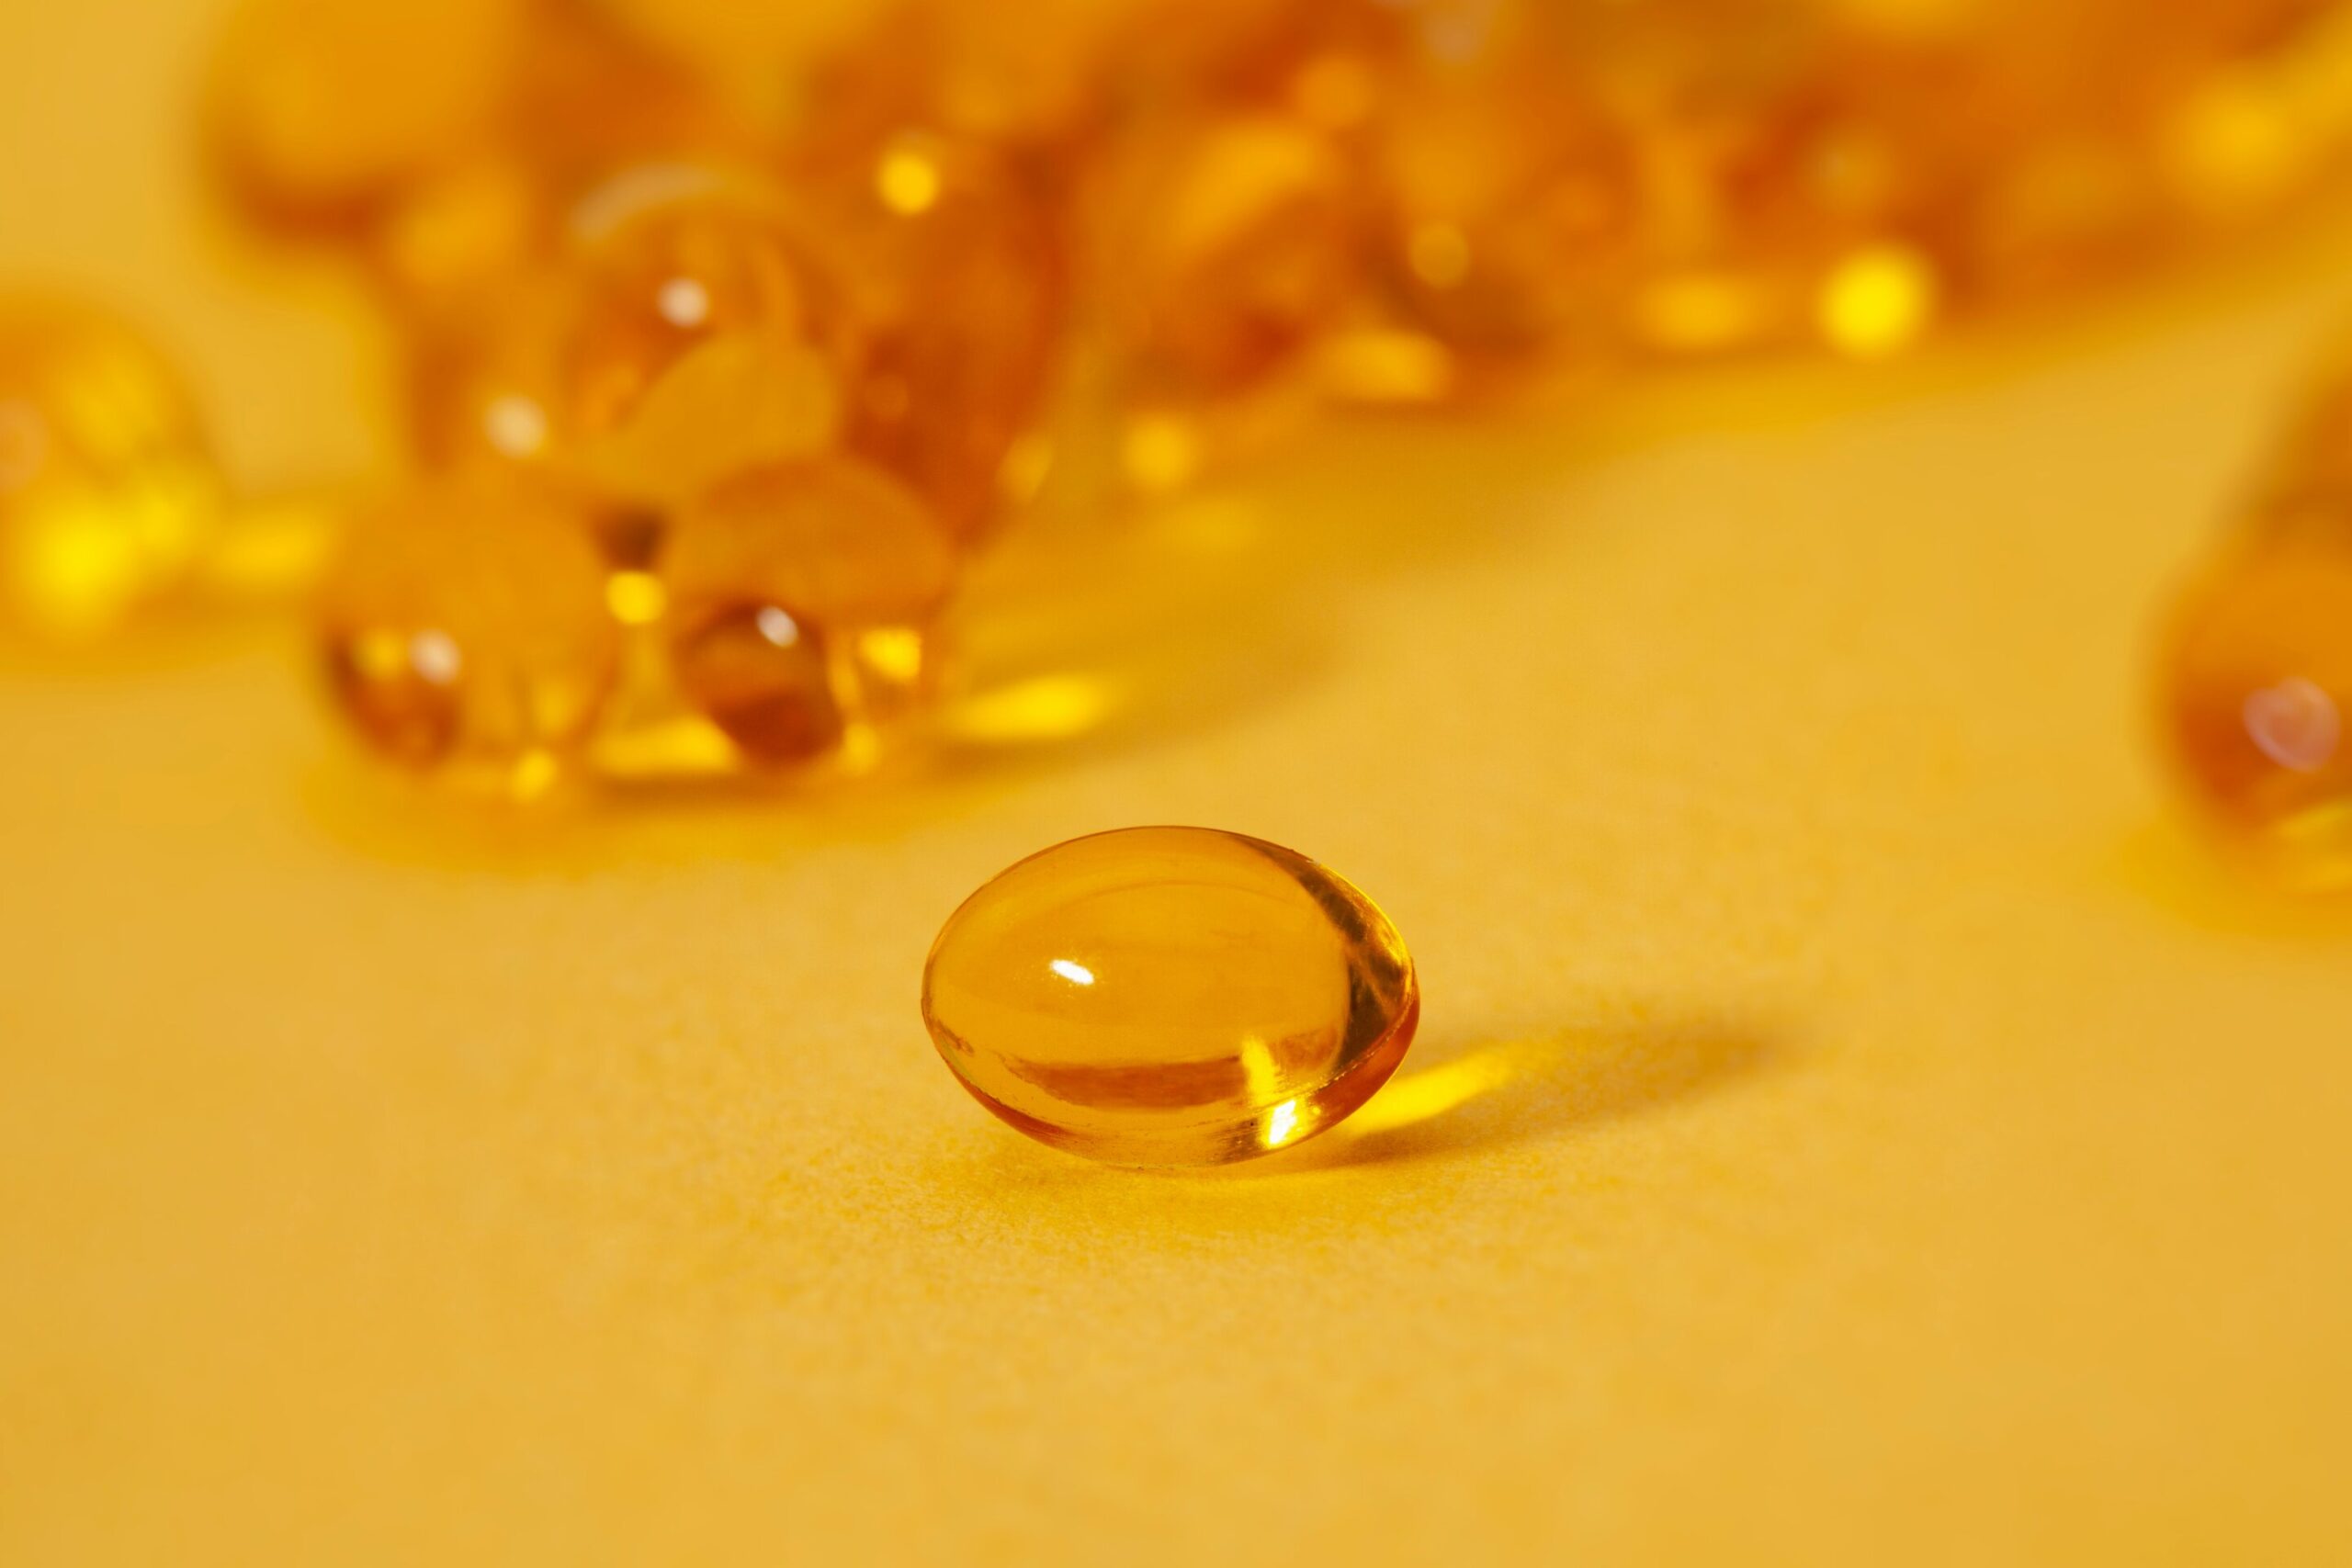 Study challenges a one-size-fits-all approach to vitamin D supplementation guidelines